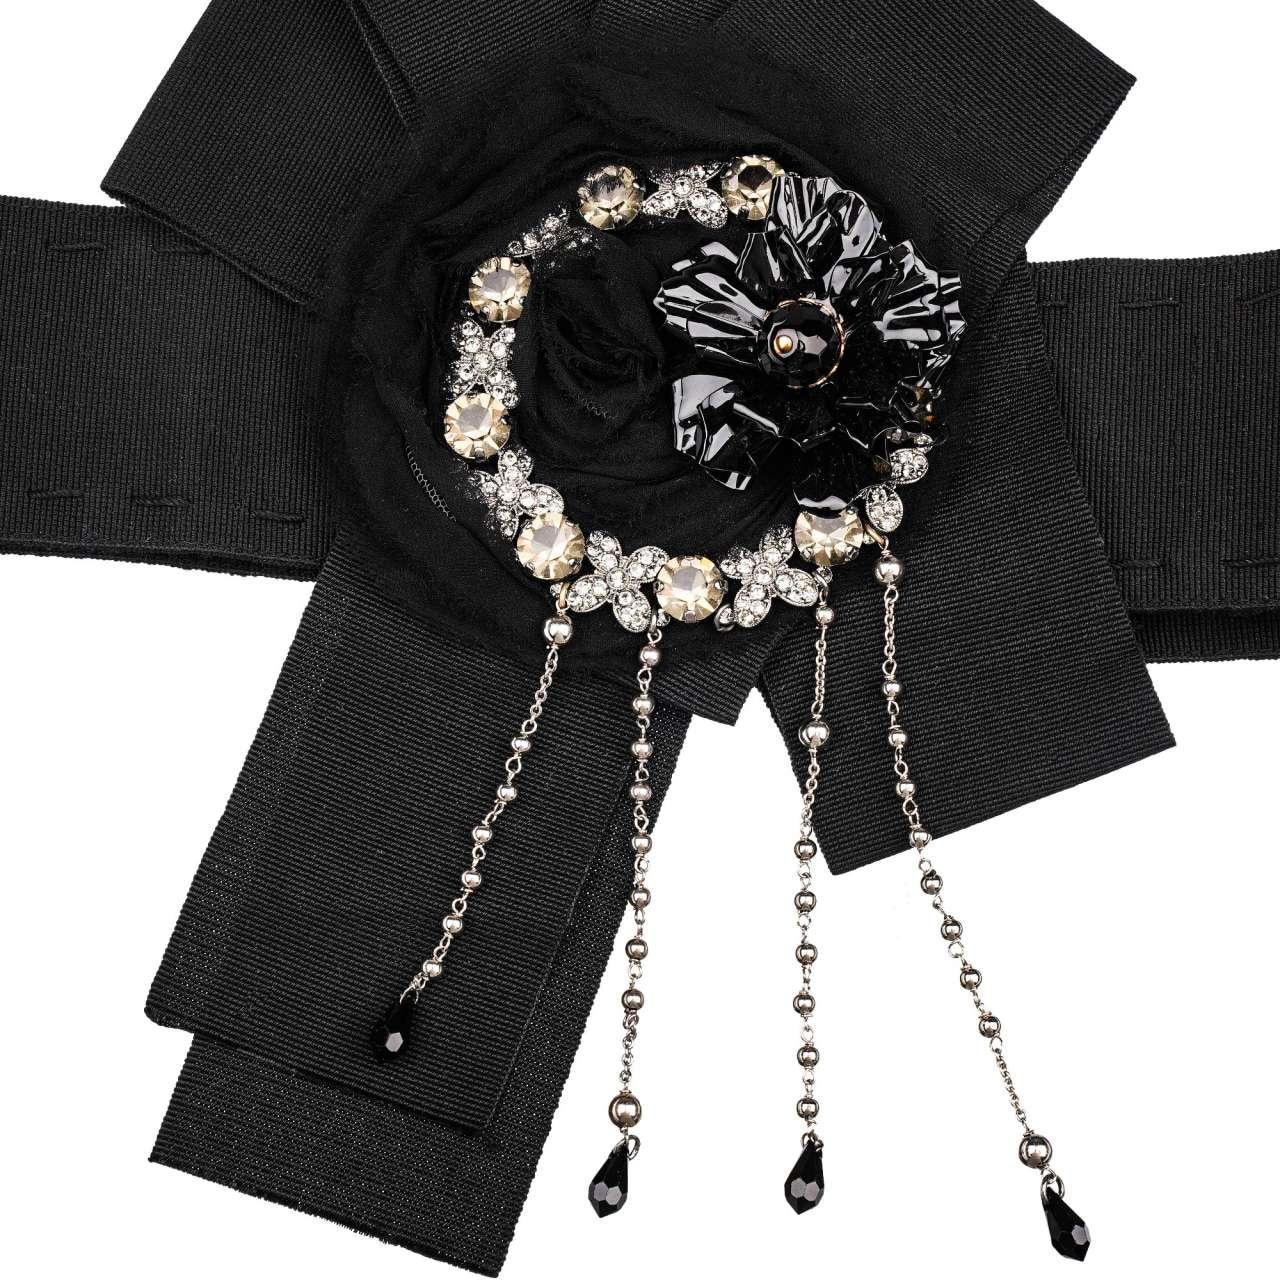 - Belt for dress with crystal and brass flower brooches, chains and silk applications in black by DOLCE & GABBANA - New with Tag - MADE IN ITALY - Modell: FB250Z-GDF69-N0000 - Material: 60% Cotton, 40% Acetat - Width: 6 cm - Push buttons Closure -